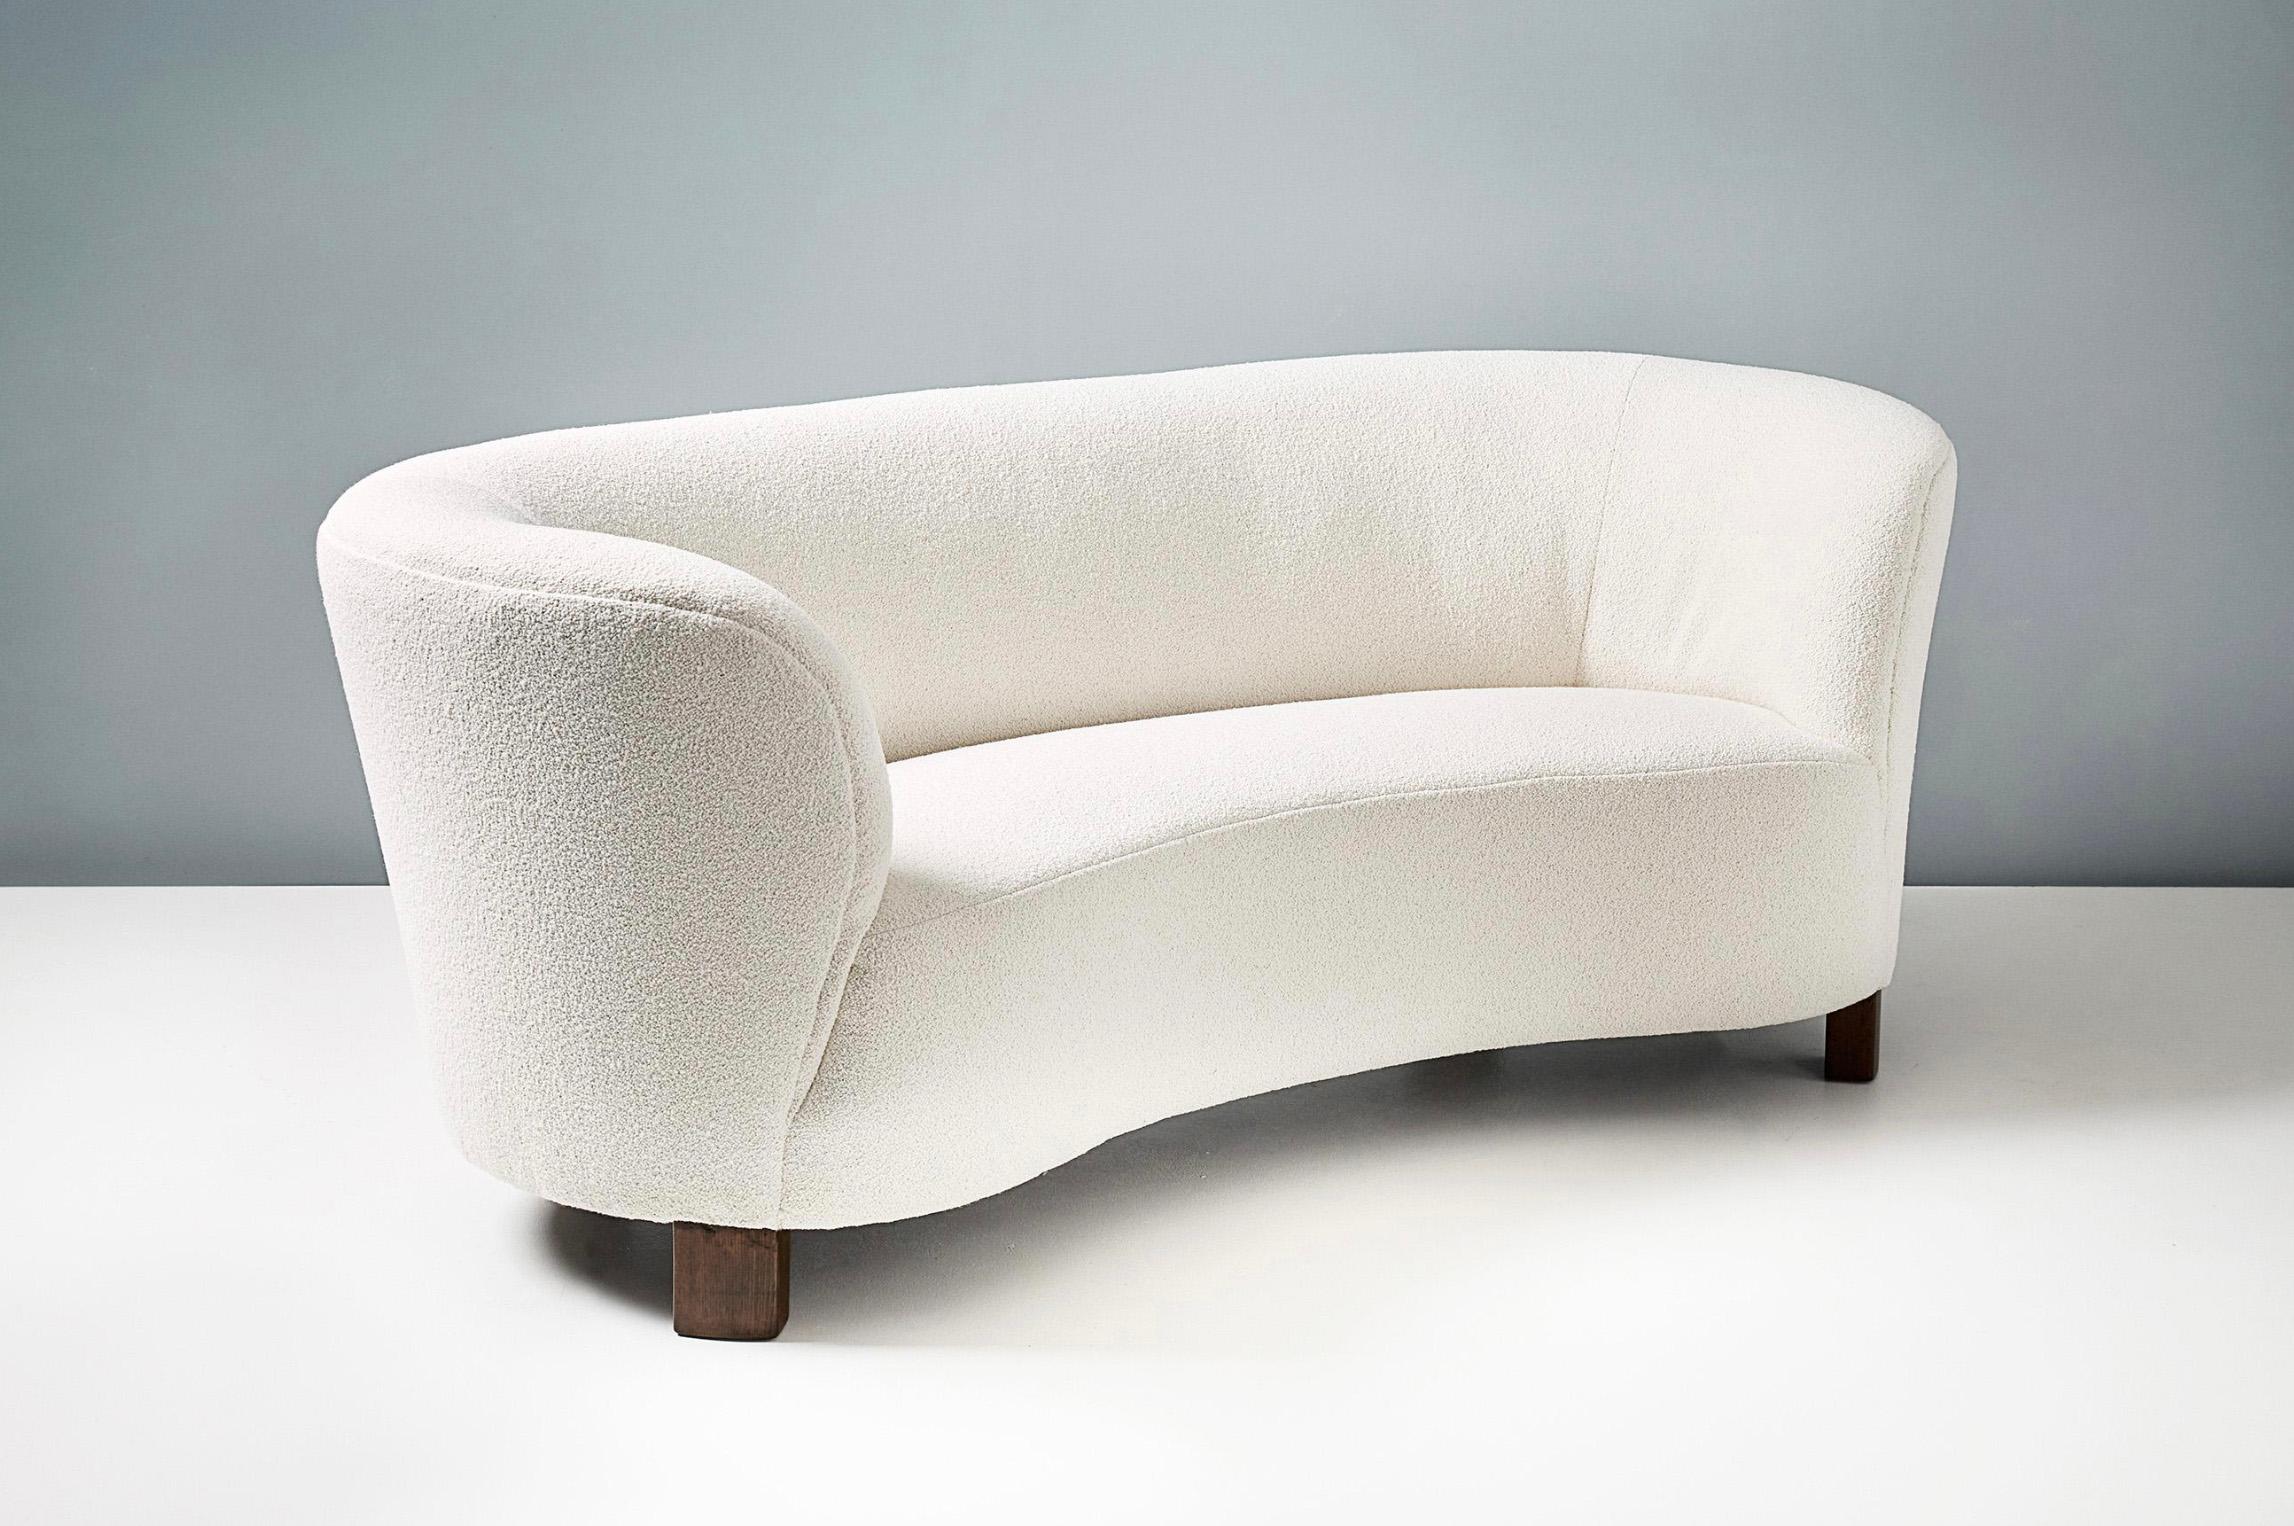 Classic curved sofa from master Danish cabinetmakers Slagelse Mobelvaerk, produced in Denmark circa 1940s. Oiled and stained, patinated oak legs with new off-white cotton-wool mix boucle upholstery from Chase Erwin, UK.